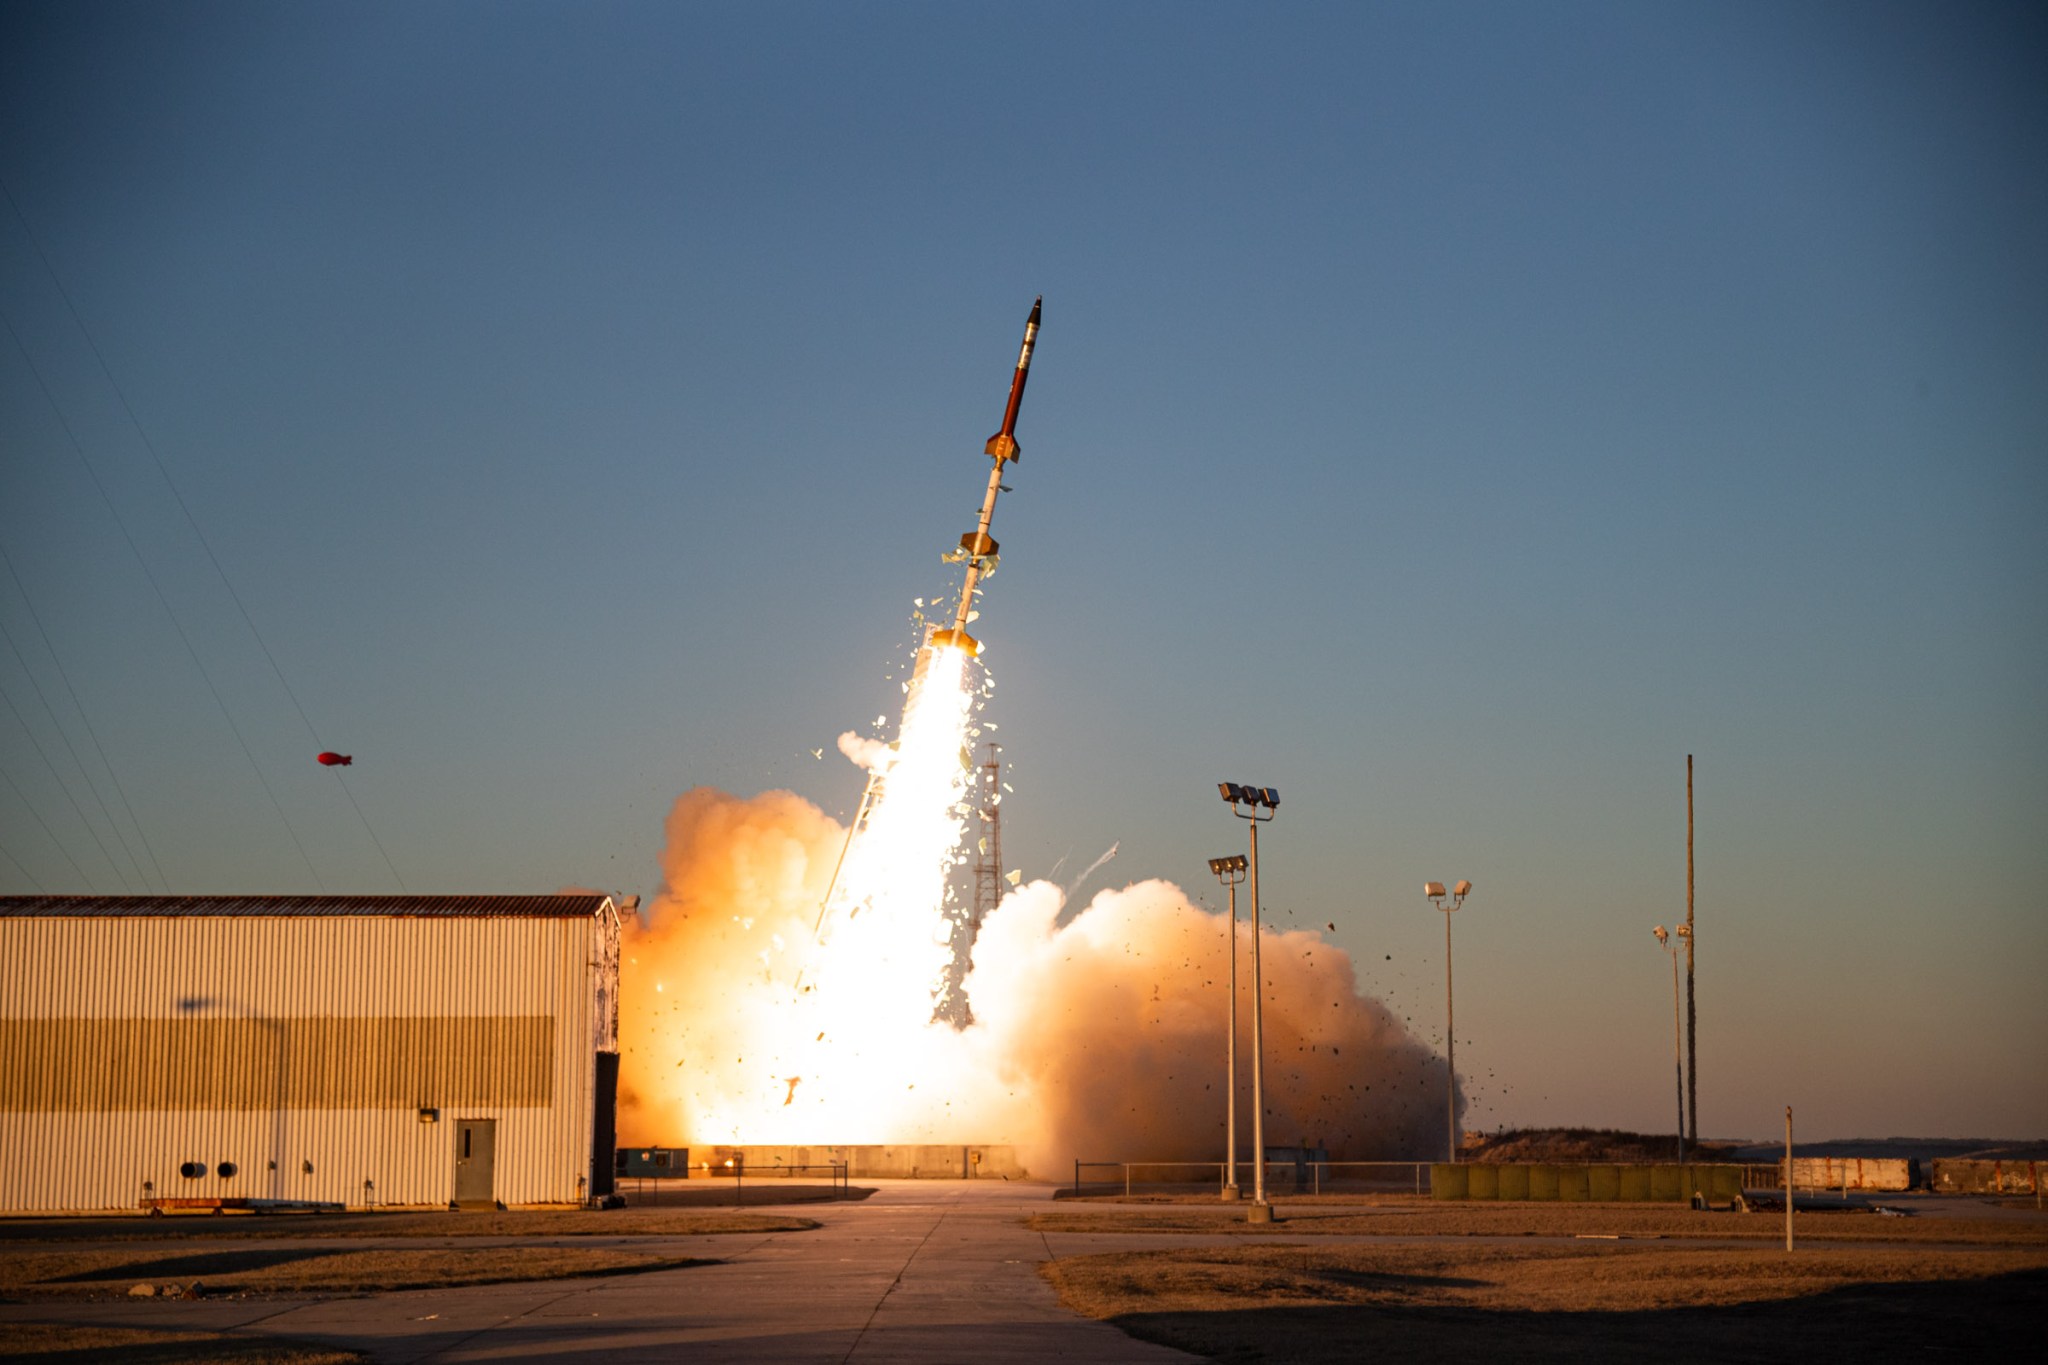 A sounding rocket seconds in mid-launch off the launch pad with a bright yellow plume underneath. The rocket, from bottom to top, has yellow fins on the bottom, a white section, bright yellow fins, a white section, bright yellow fins, a red section that leads to a silver section, and then a black cone-shaped top. In the background is a blue sky.